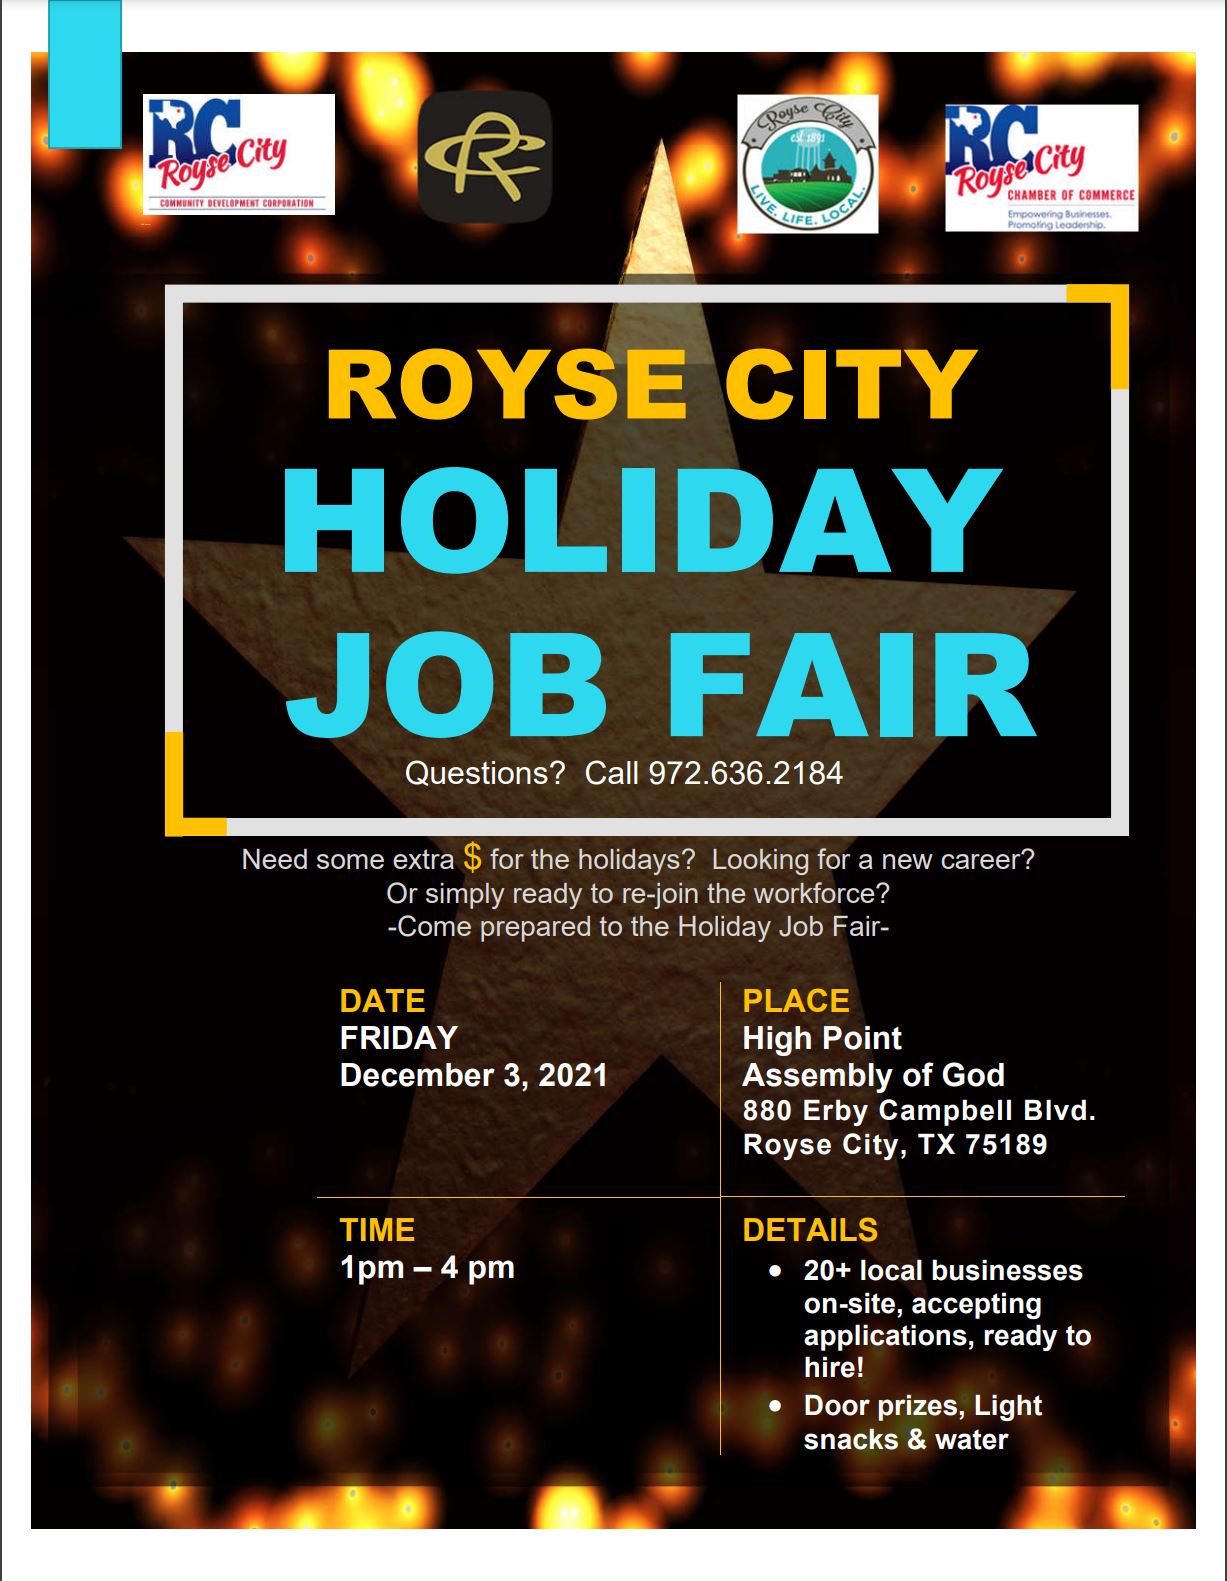 Find Your Perfect Career at the Royse City Holiday Job Fair on December 3rd! Main Photo